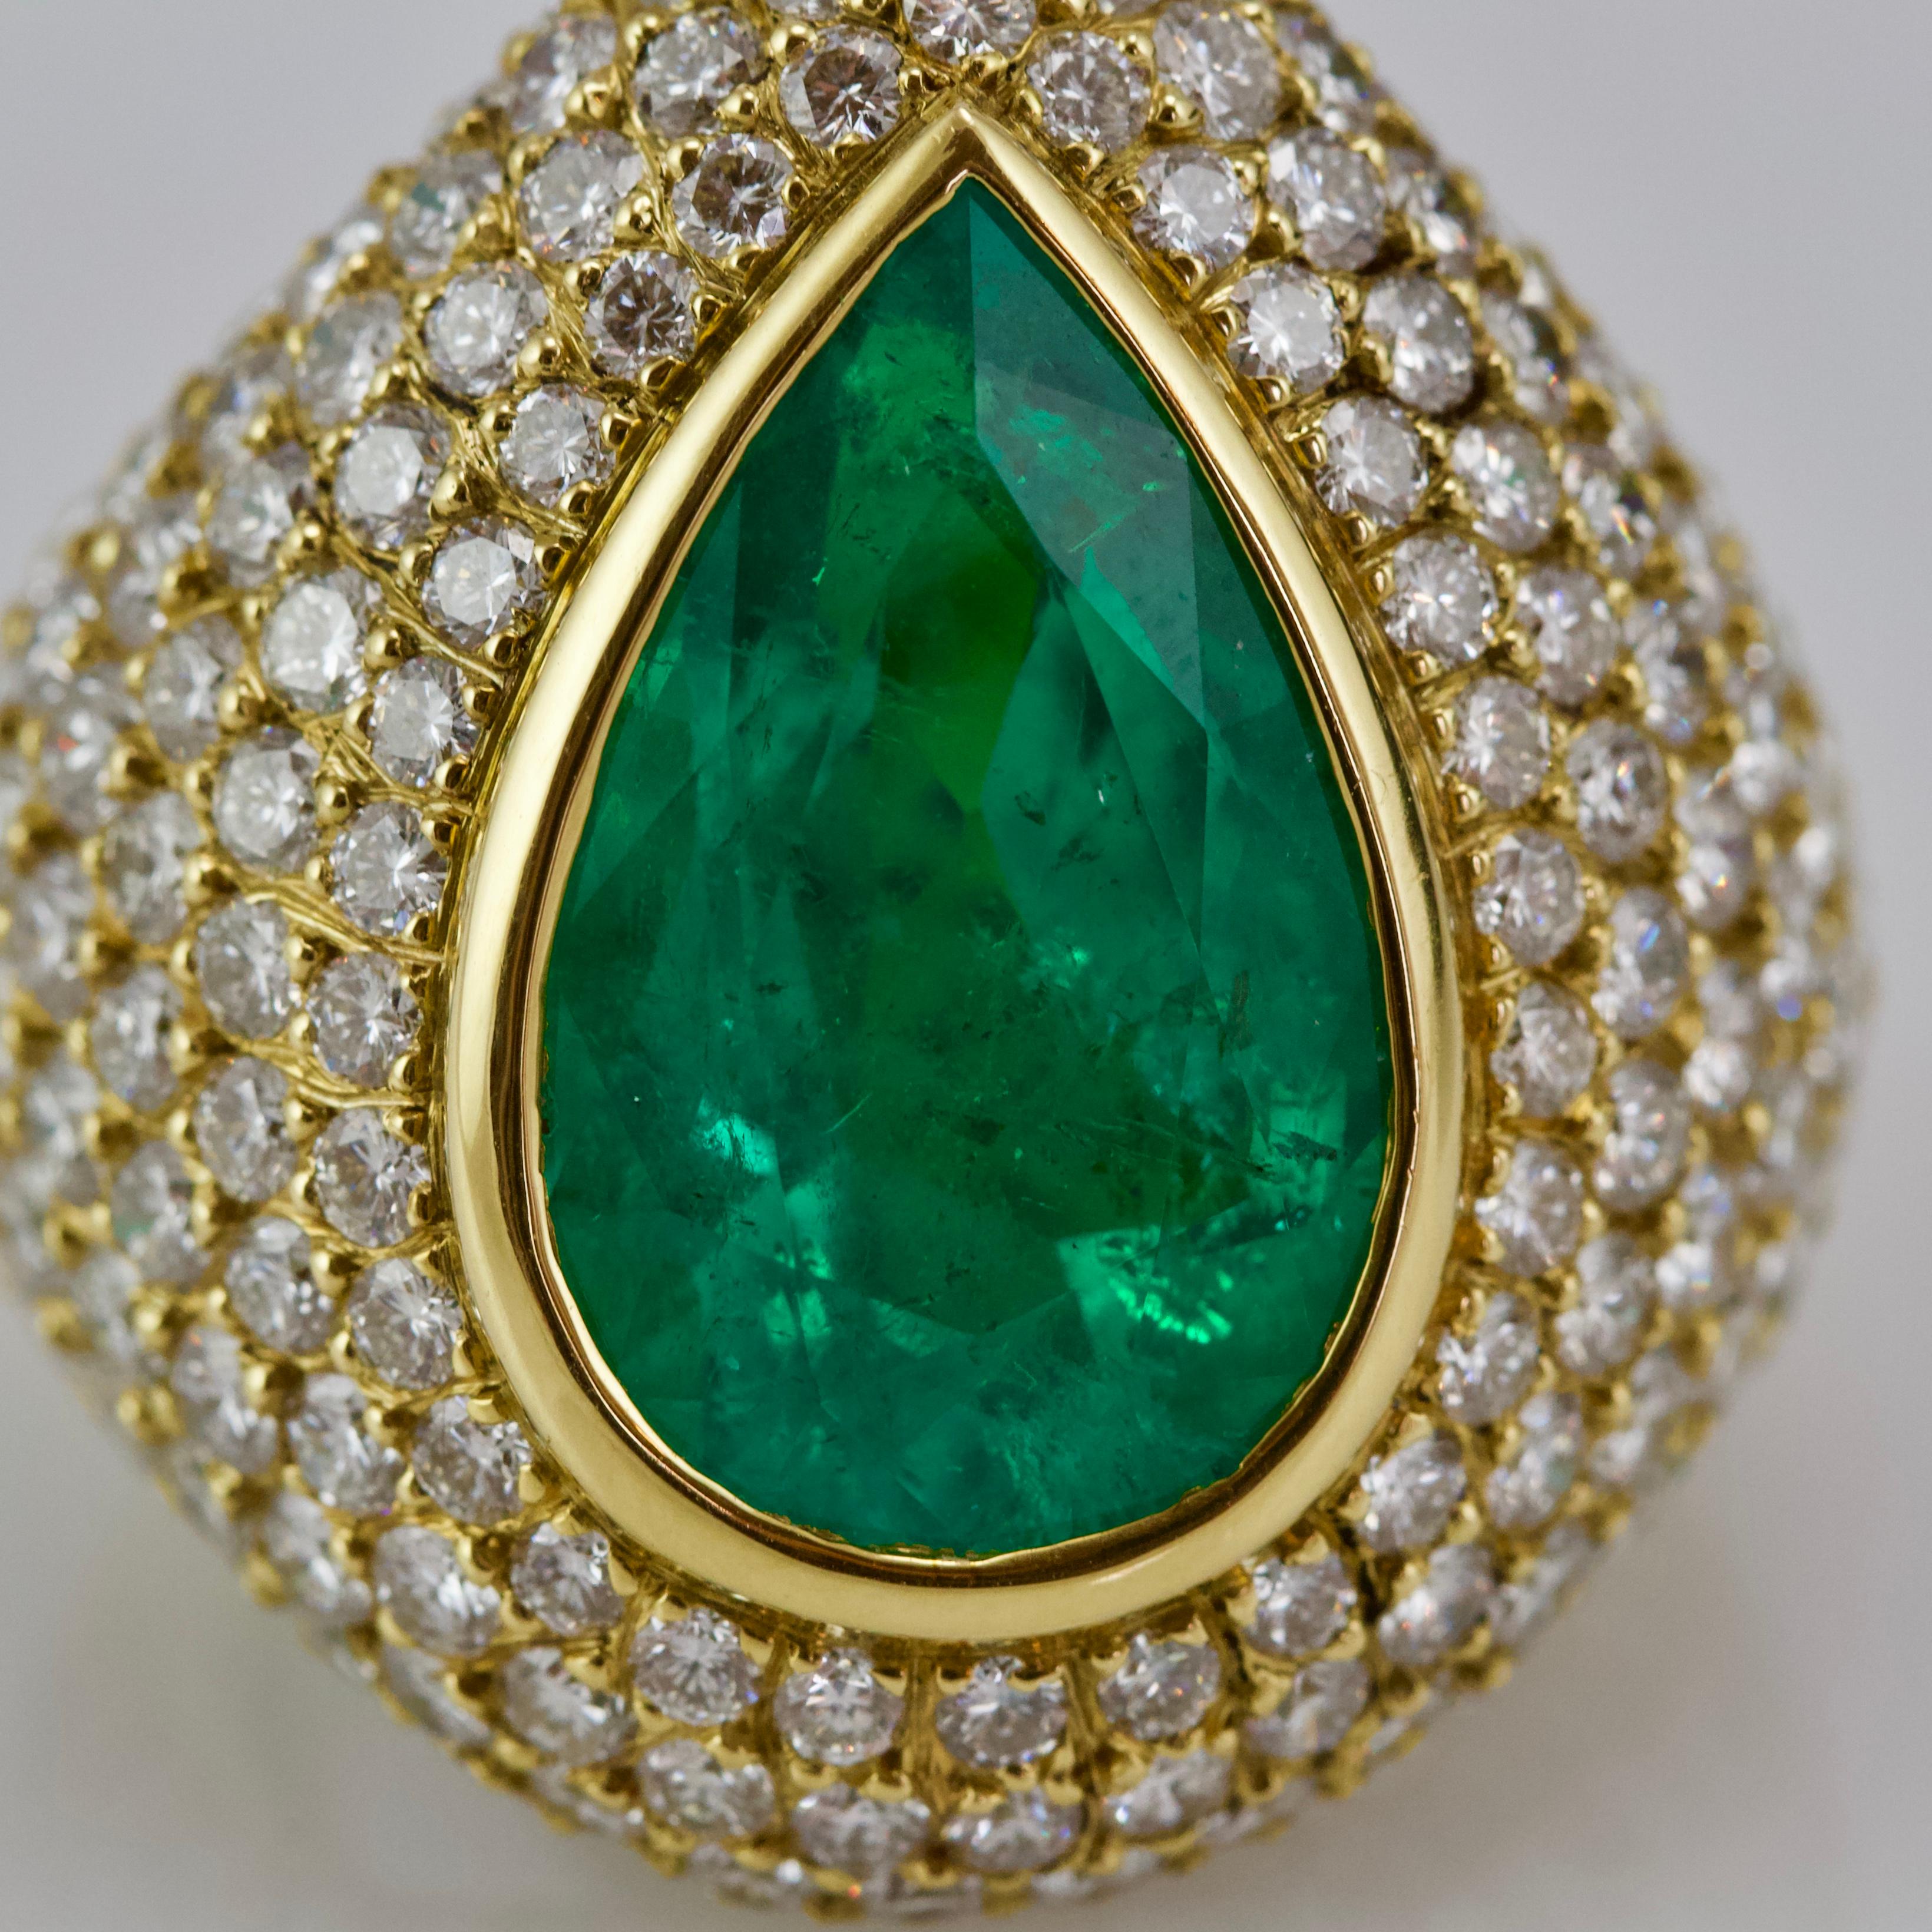 Yellow gold, diamond and emerald cocktail ring. 
Box set pear shaped emerald weight approximately 8 carats in a dome 2 of diamonds weight almost 7 carats 
Circa 1980
Color: medium green
Clarity: naturals inclusions
Quality of diamonds: H VS
French